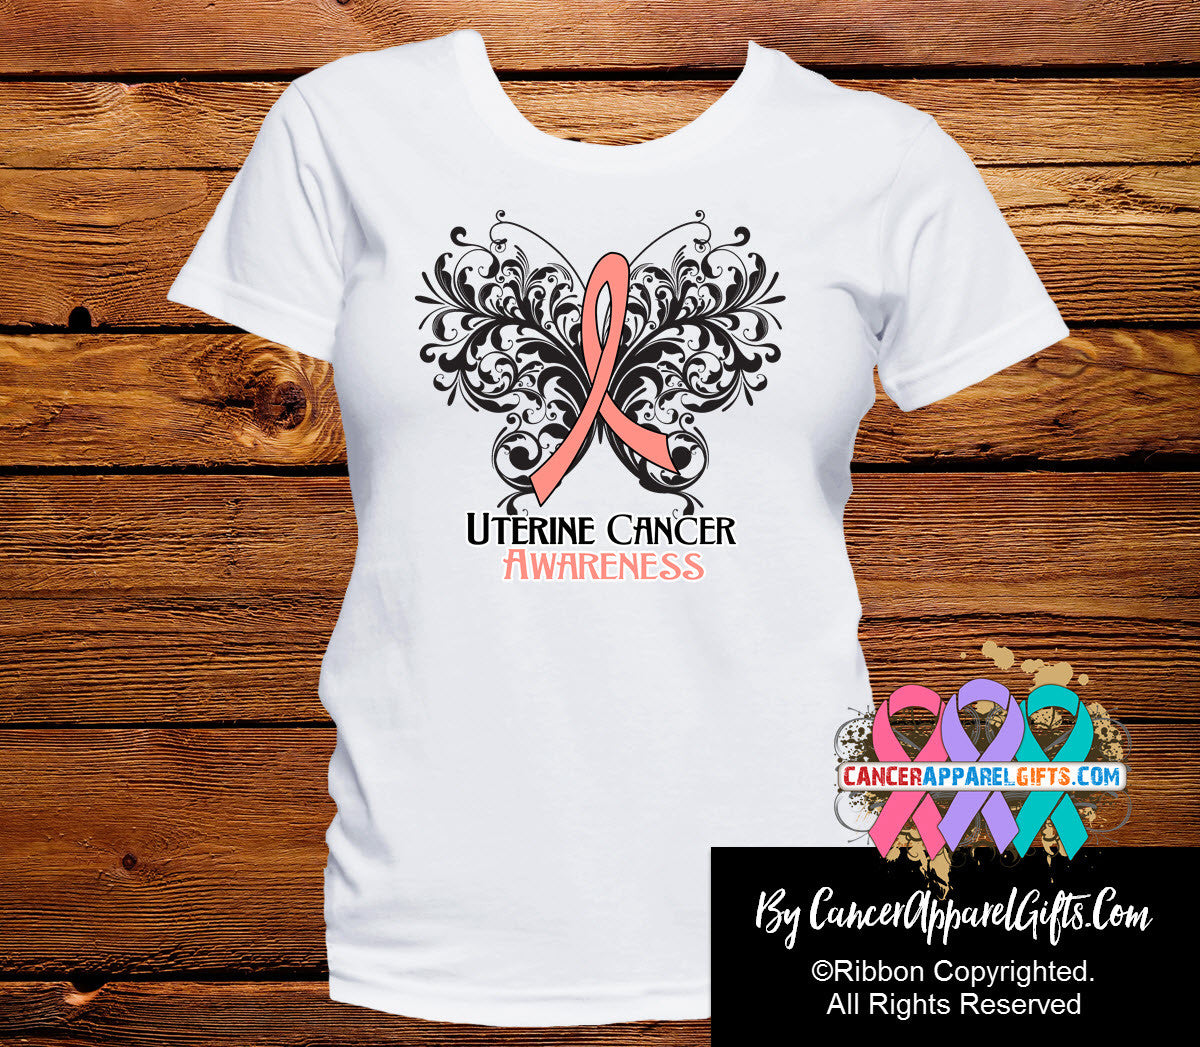 Uterine Cancer Butterfly Ribbon Shirts | Cancer Apparel Gifts at Shopify